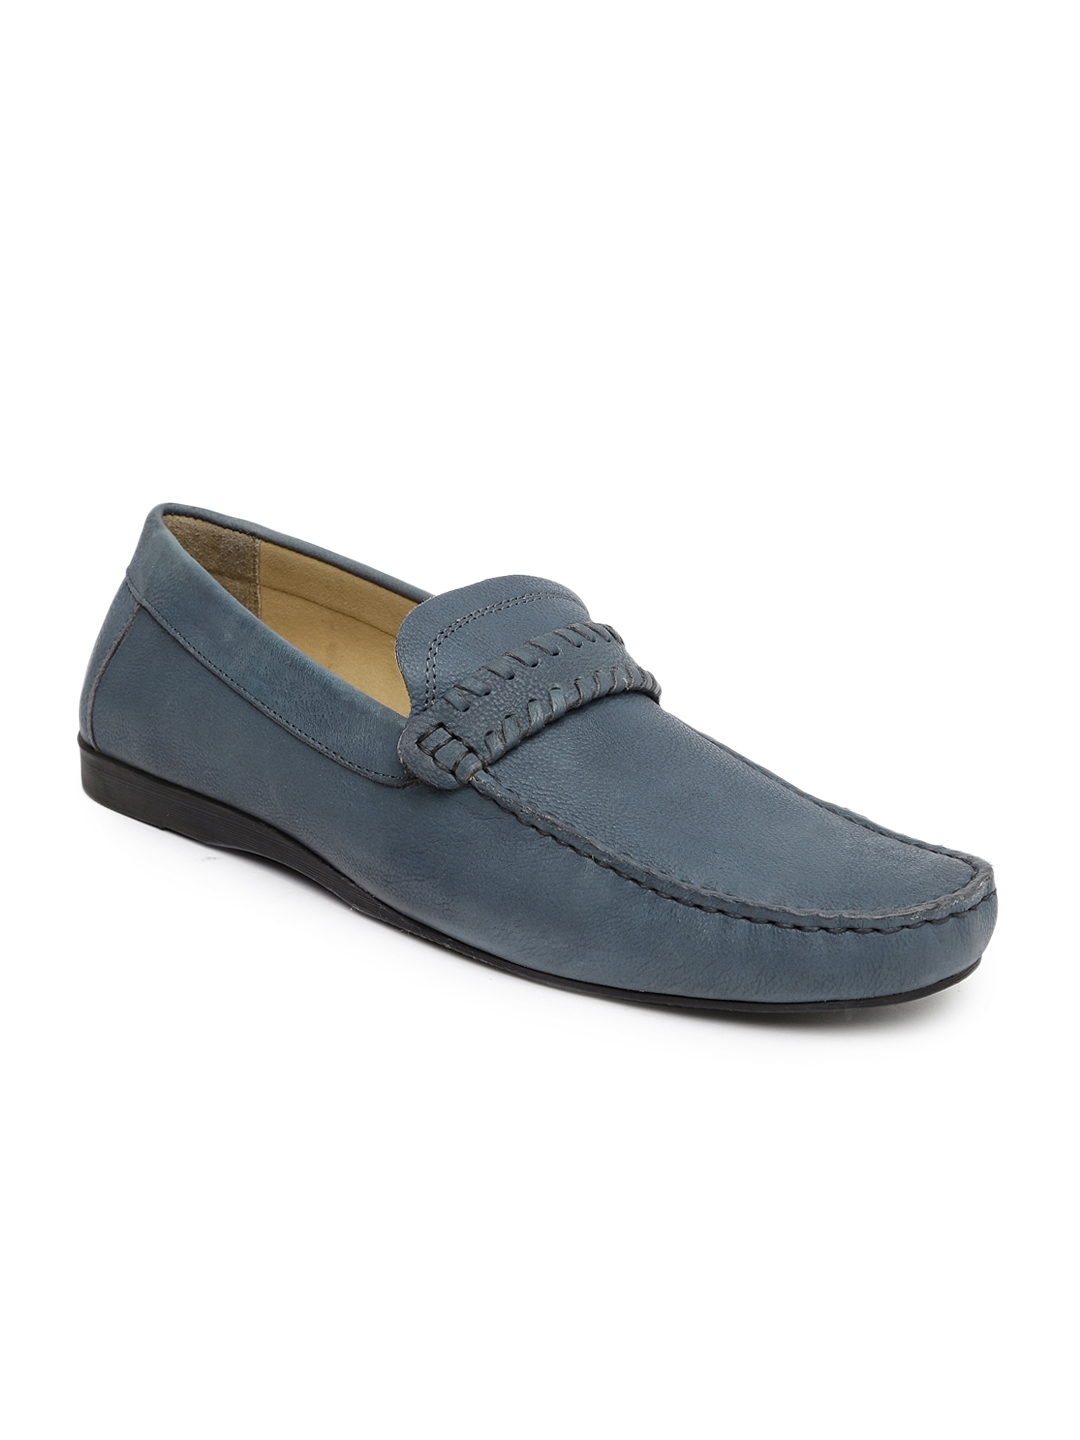 Buy Mast & Harbour Men Blue Leather Loafers - Casual Shoes for Men ...